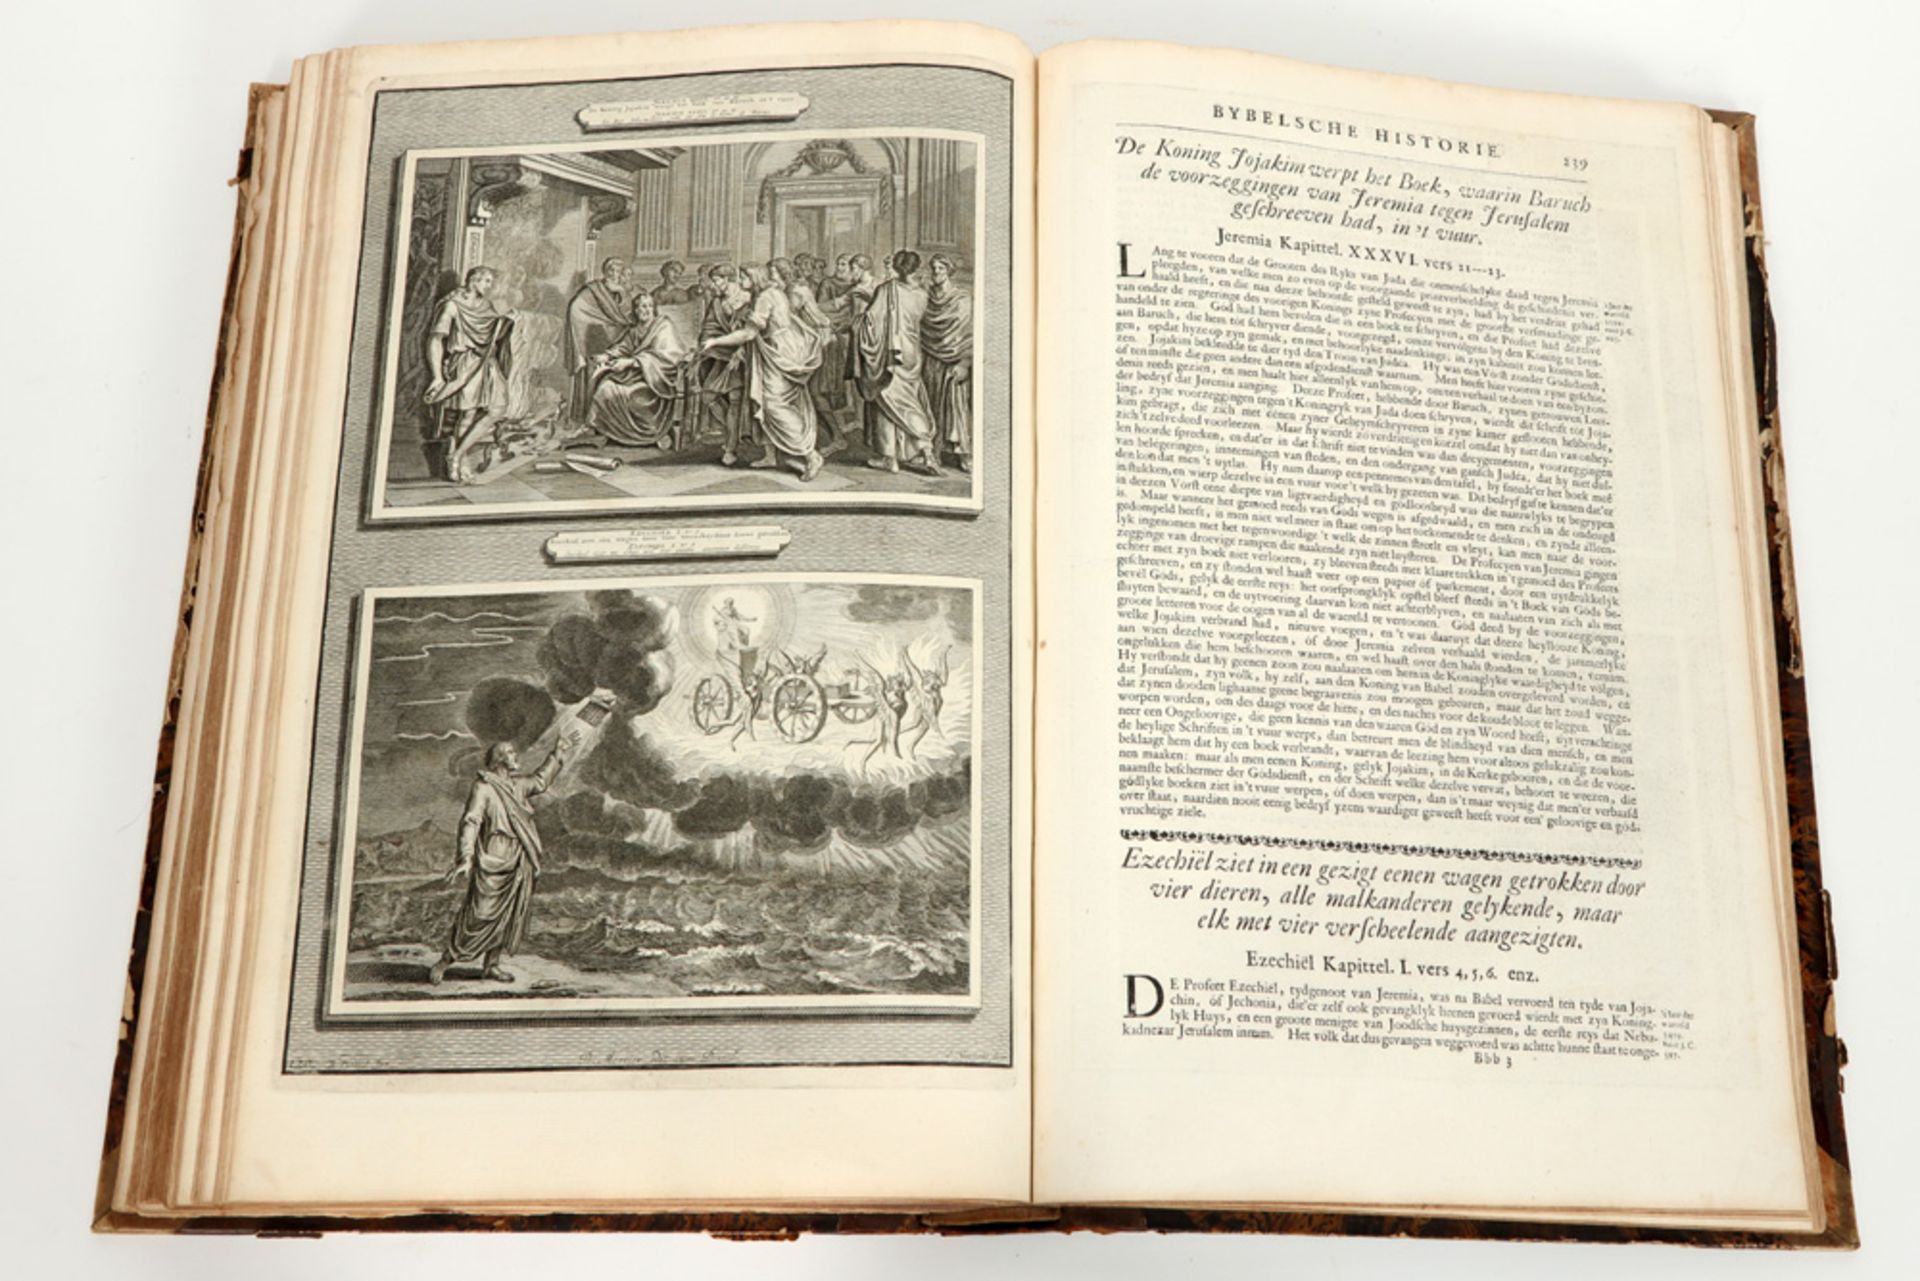 two-part Dutch print bible - the so-called "Mortier" bible - published in 1700 by Pieter Mortier in  - Image 4 of 6